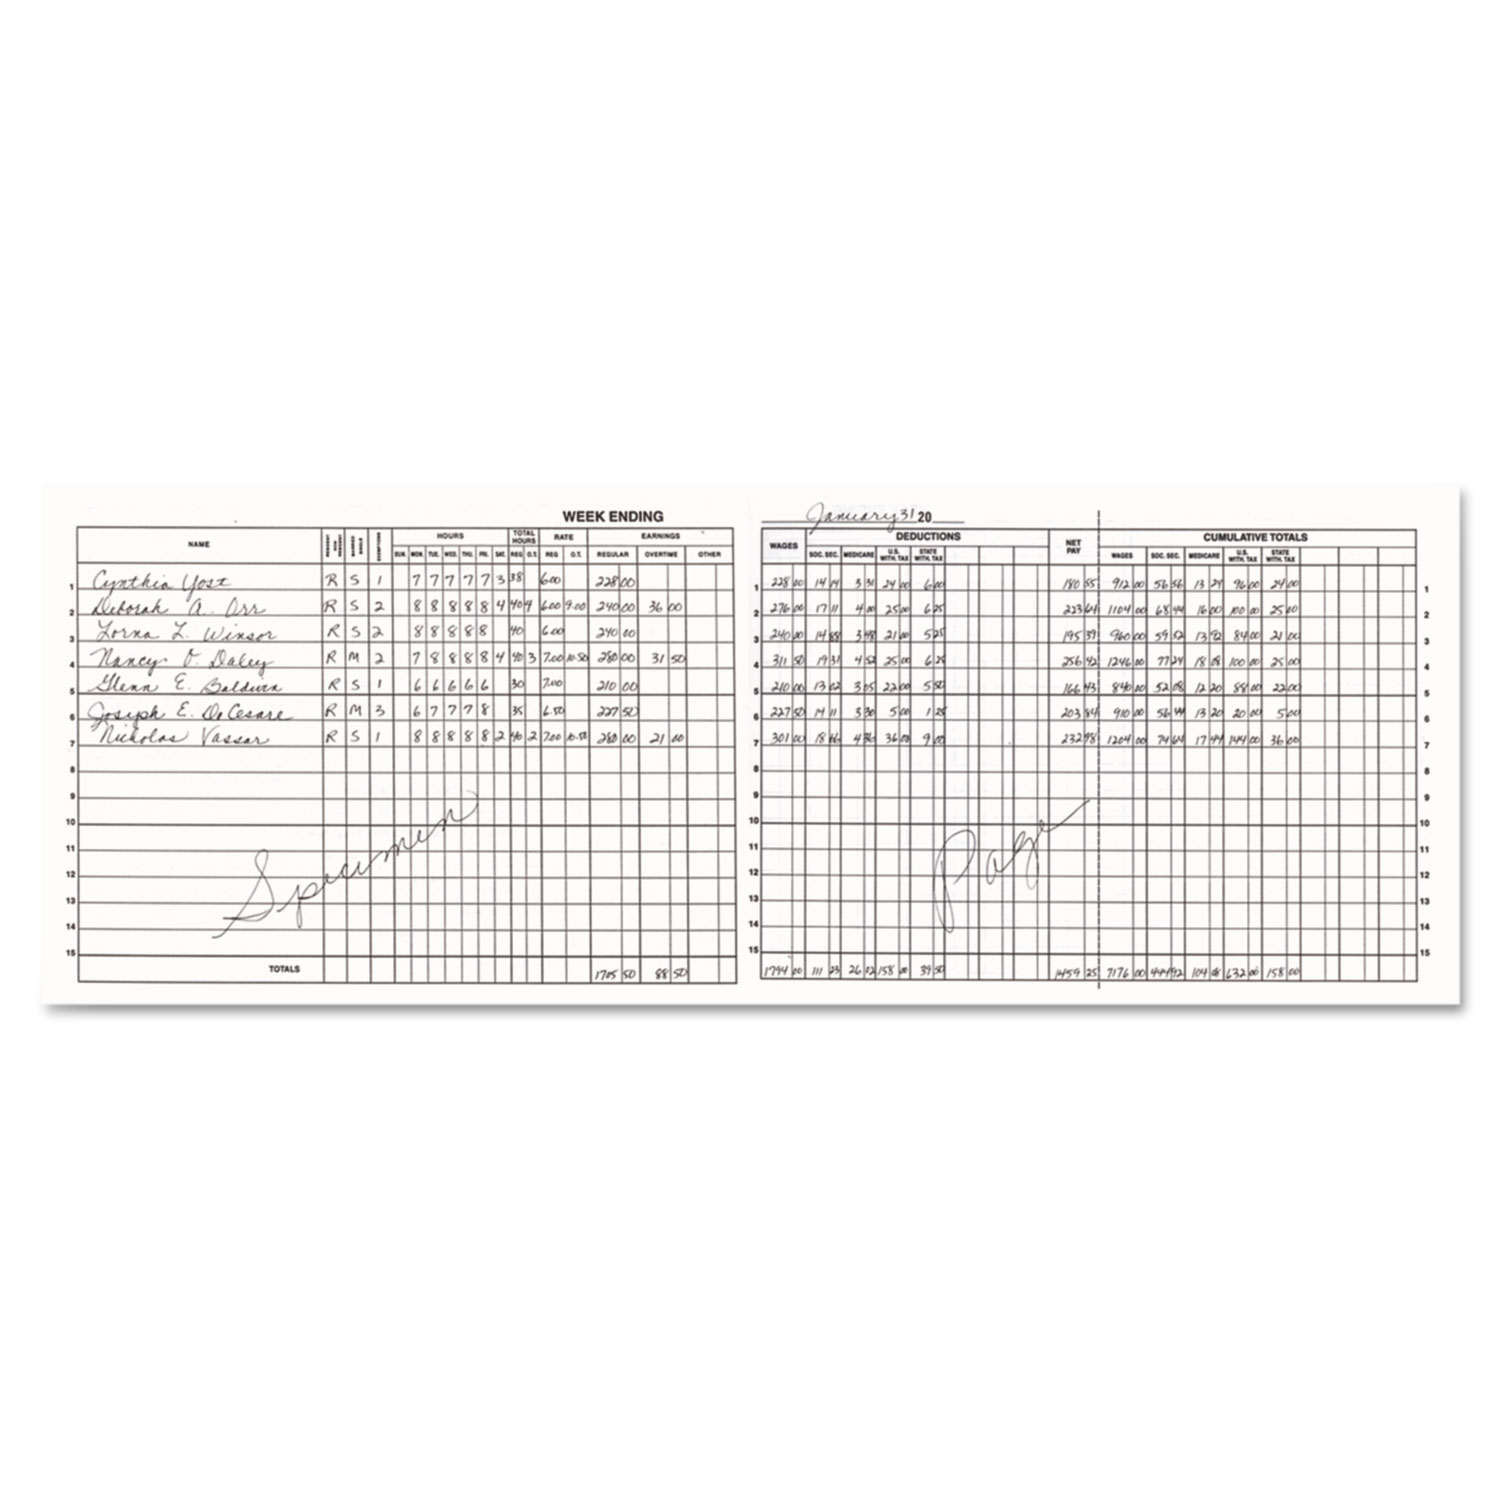 Simplified Payroll Record, Light Blue Vinyl Cover, 7 1/2 x 10 1/2 Pages